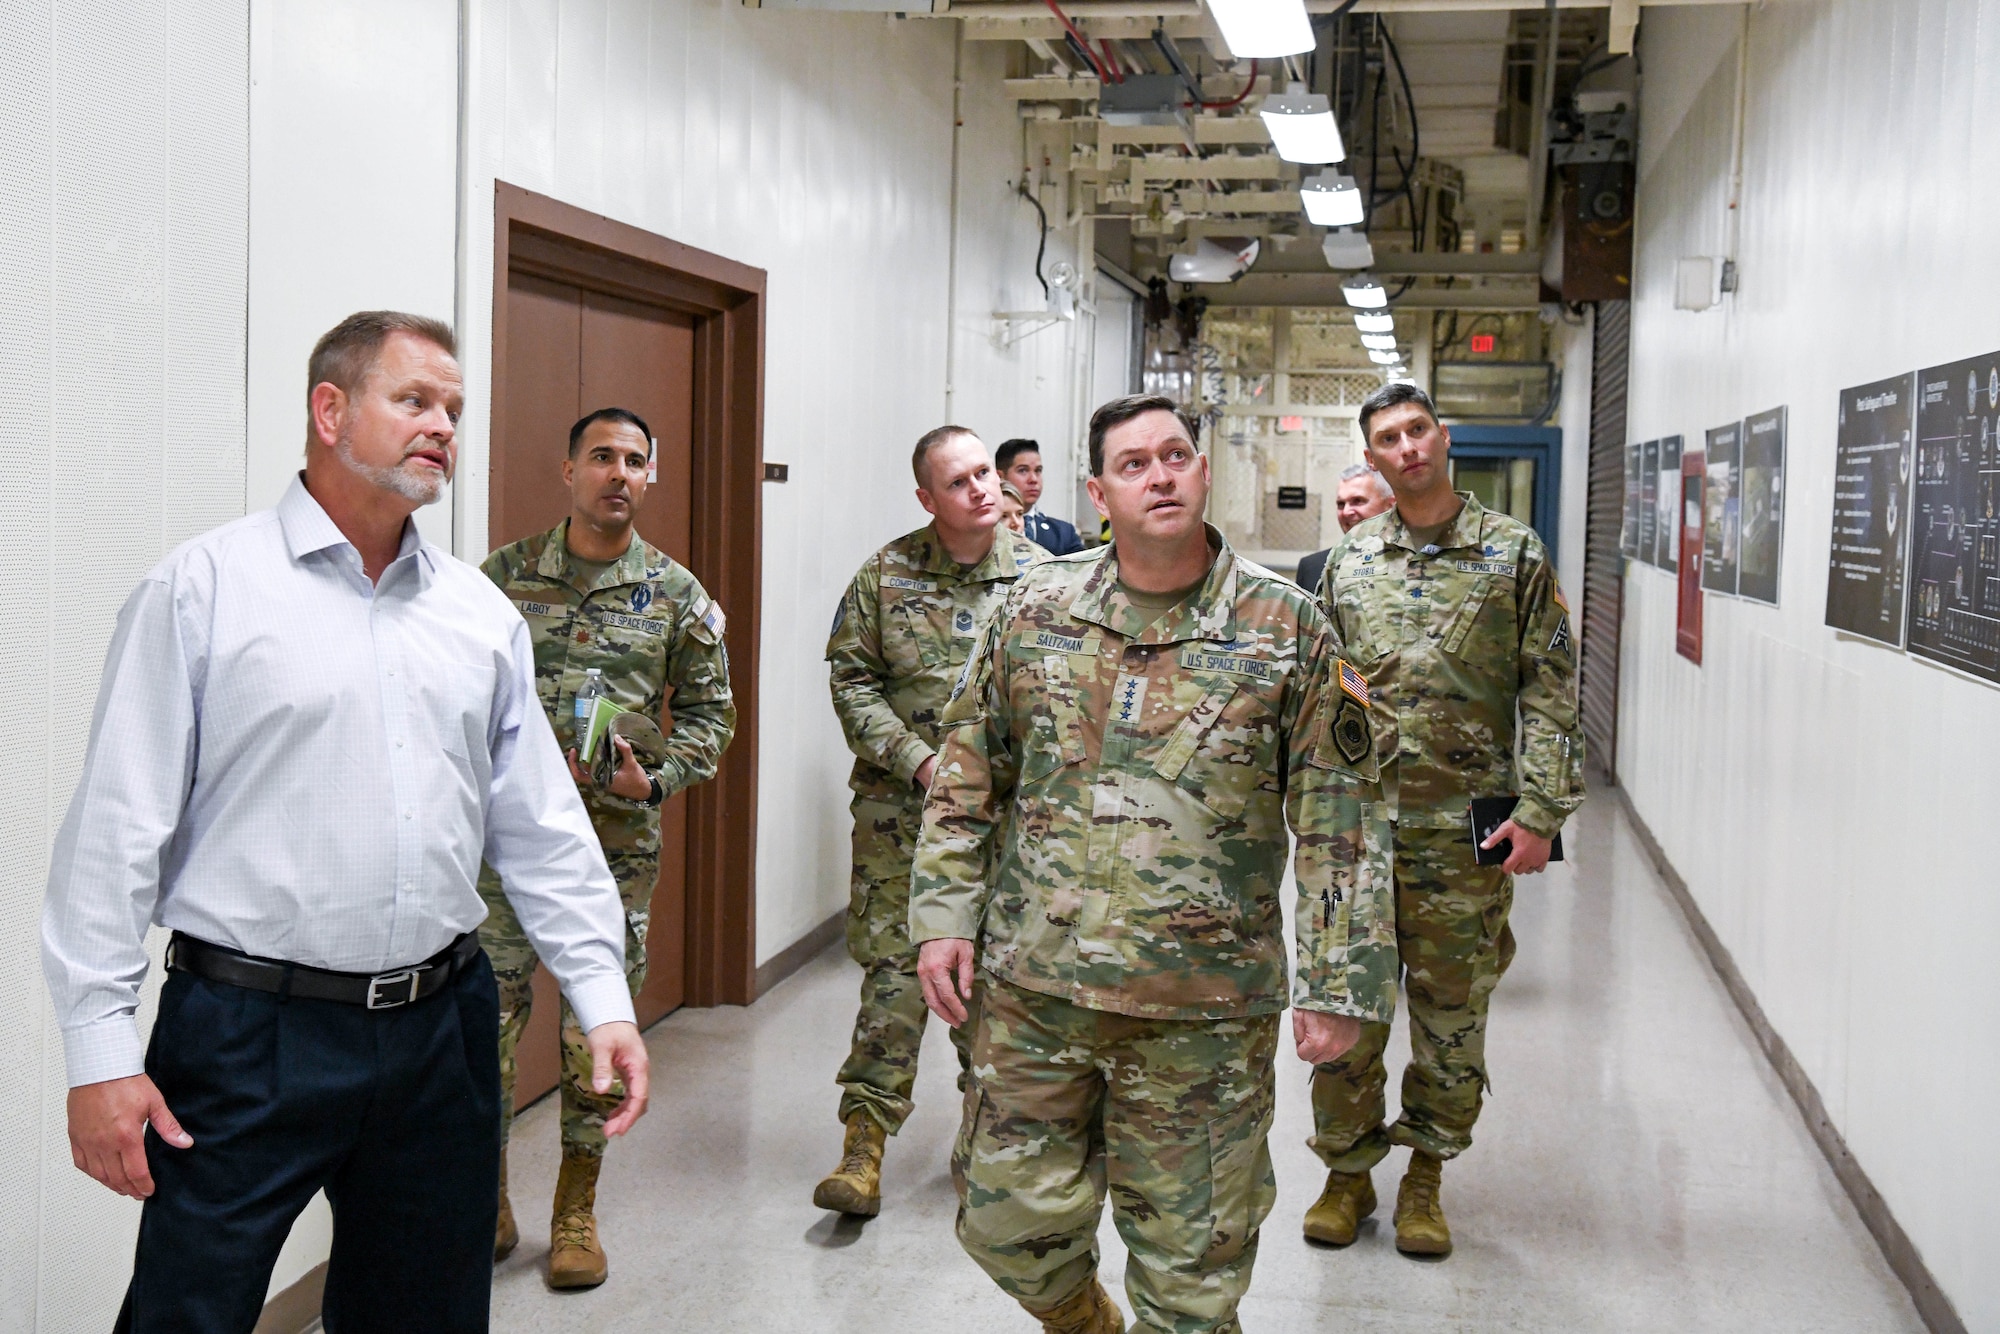 Four star military general walks with a group of military members.